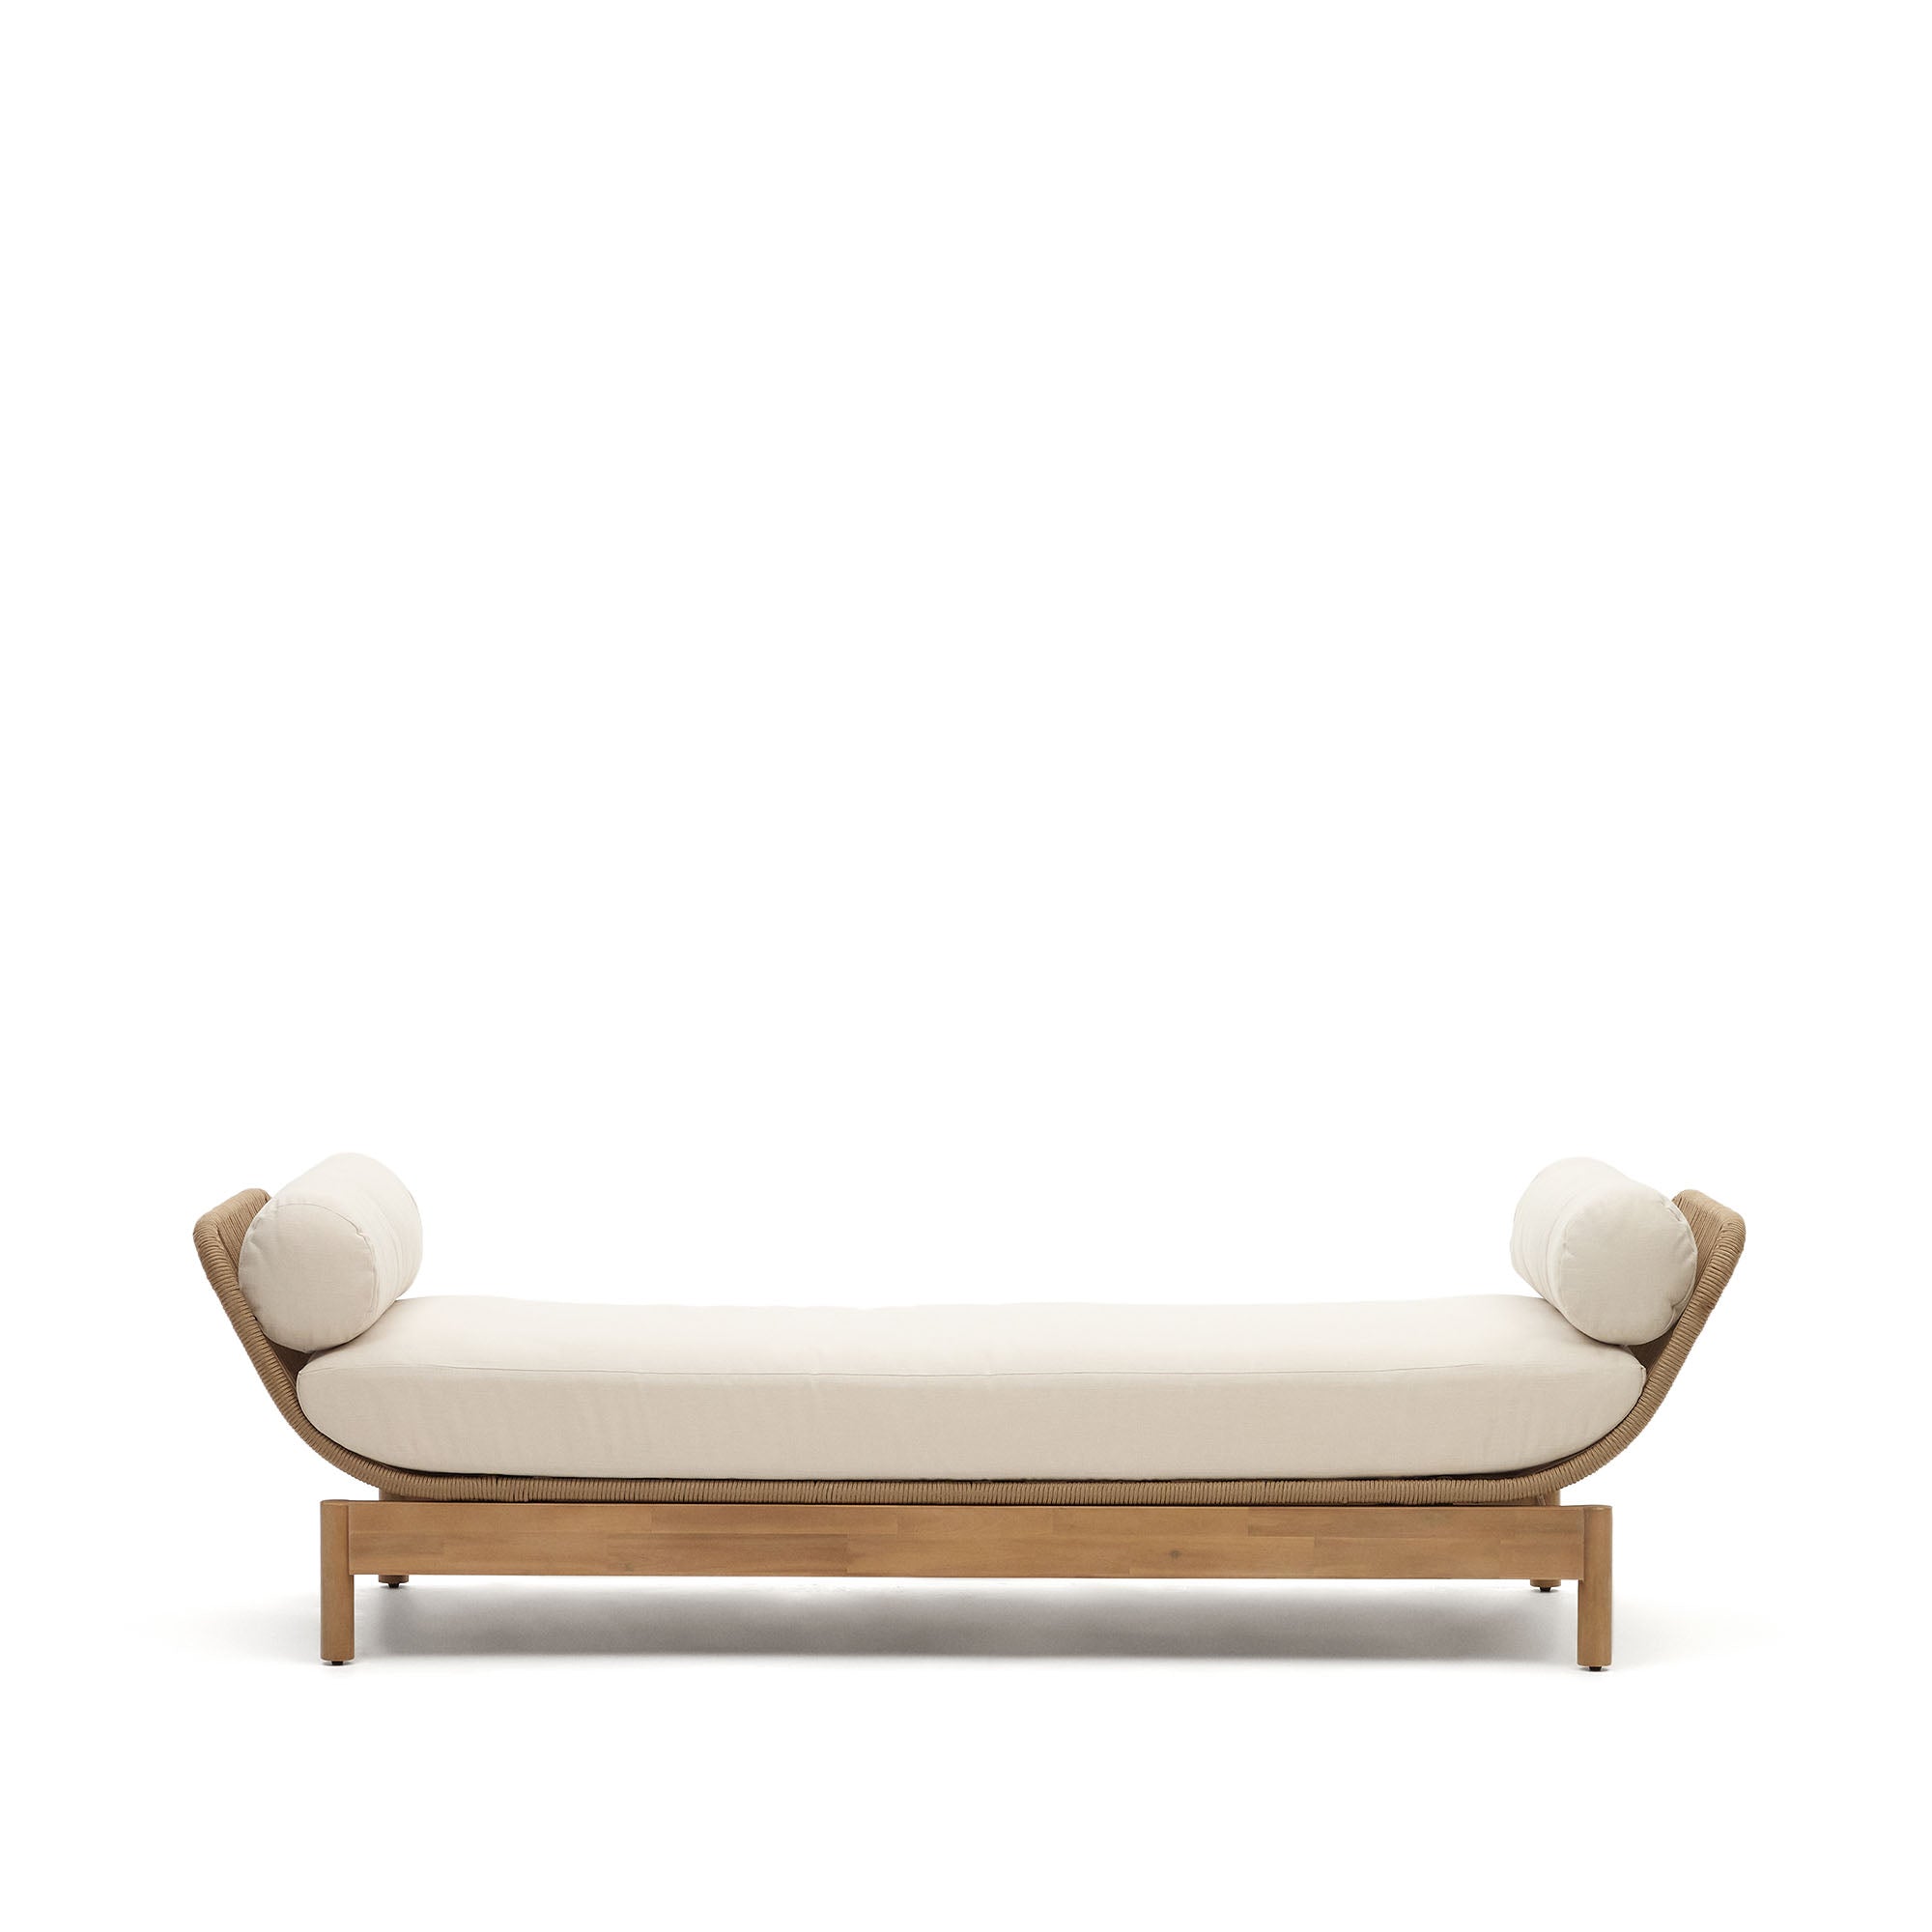 Catalina sun lounger, in beige cord and solid FSC acacia wood